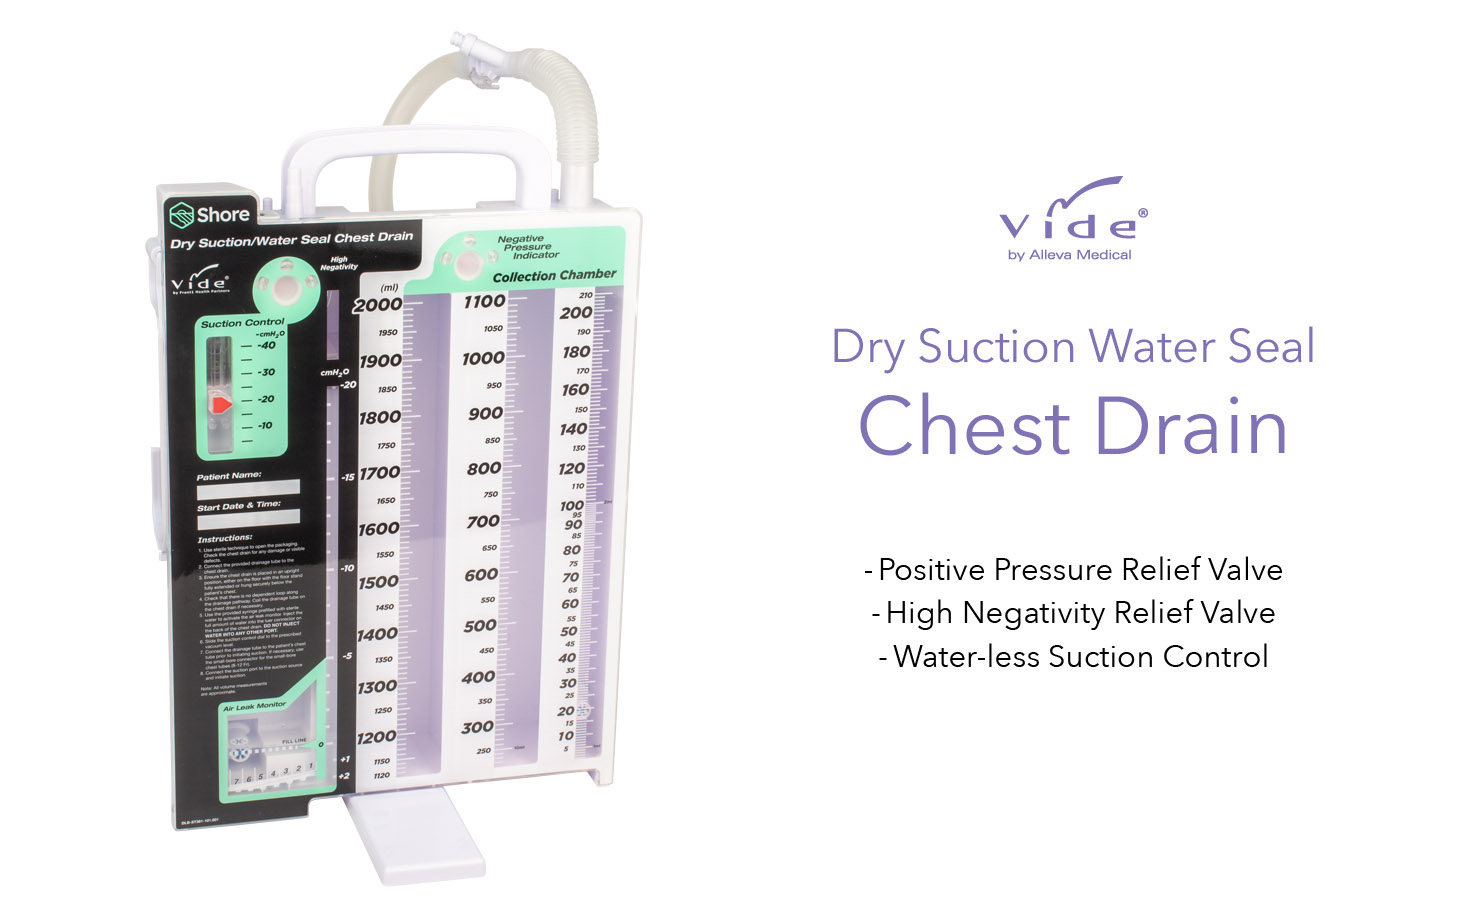 Dry Suction Water Seal Chest Drain